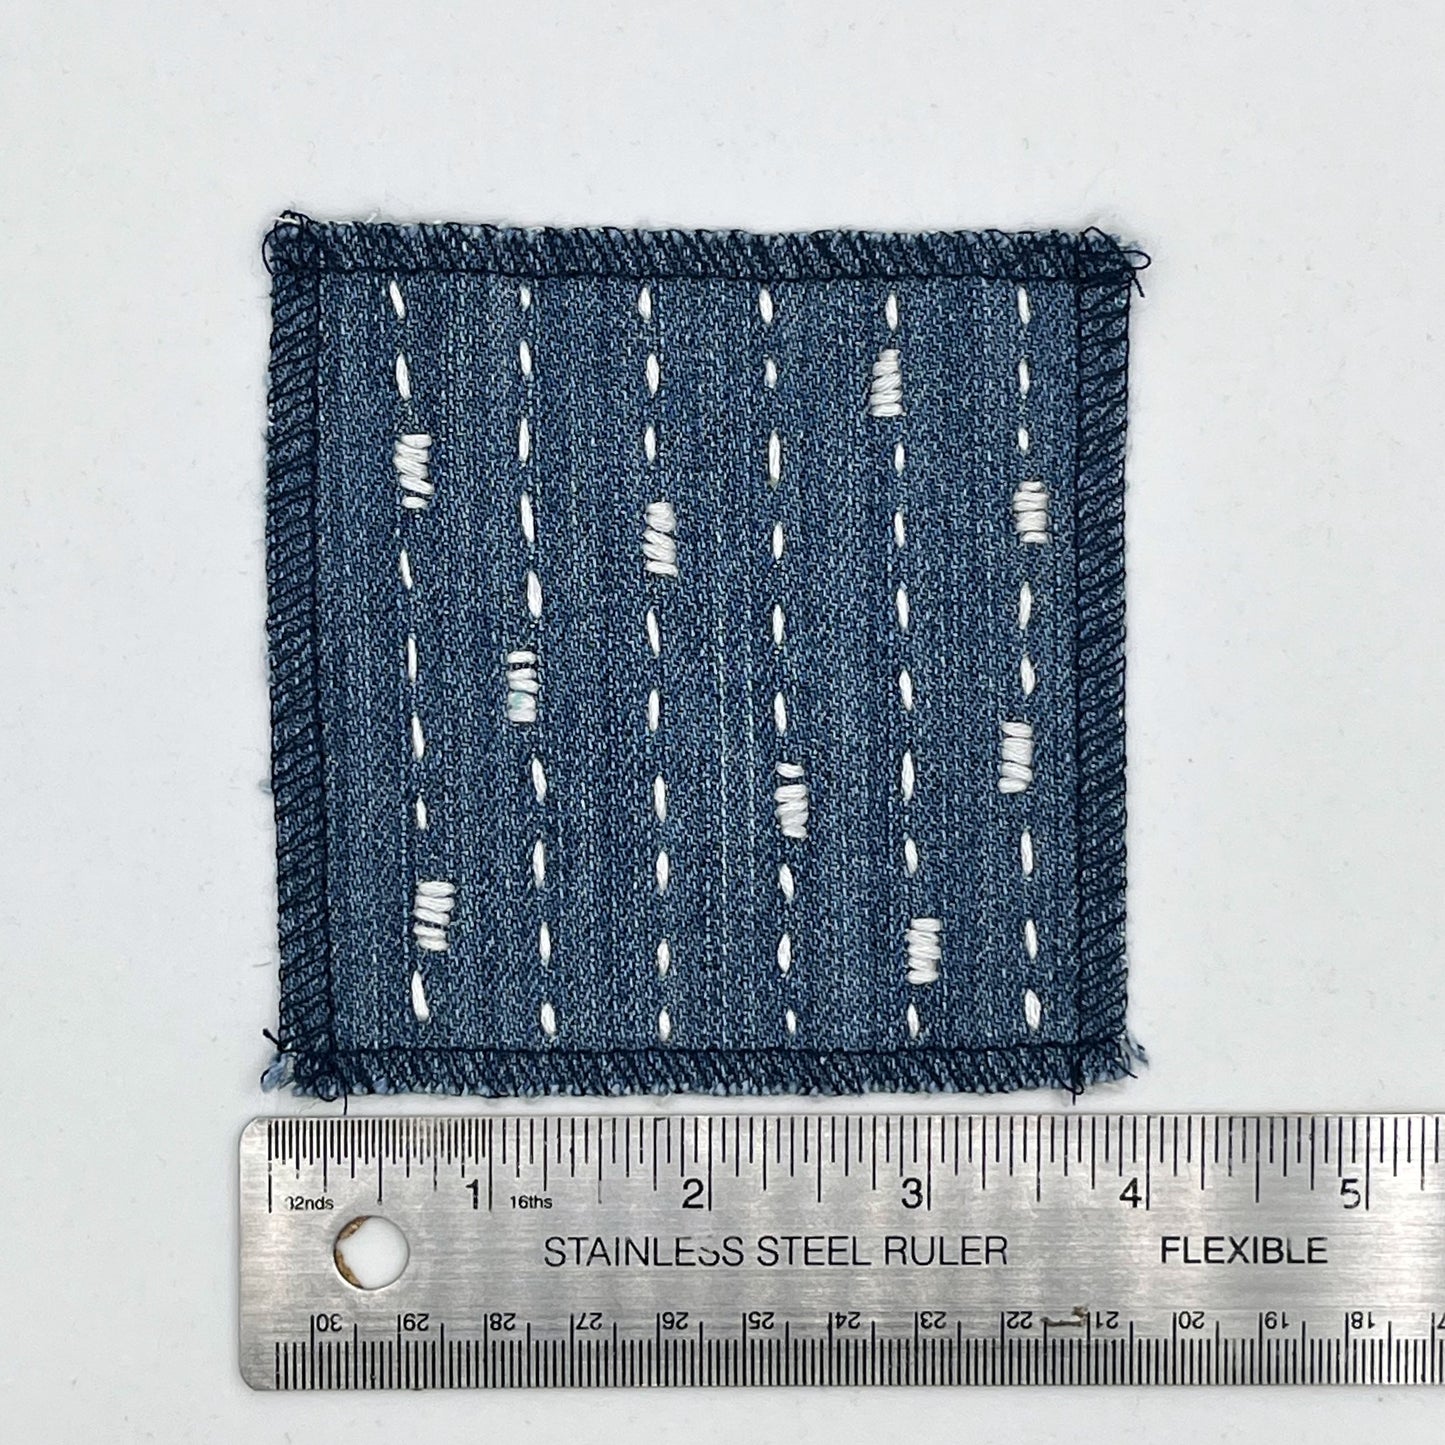 a square patch made out of denim, handstitched with ivory running stitches with randomly placed small rectangles made of stitches running the other direction, with overlocked edges, on a white background next to a ruler to show width of 4 inches